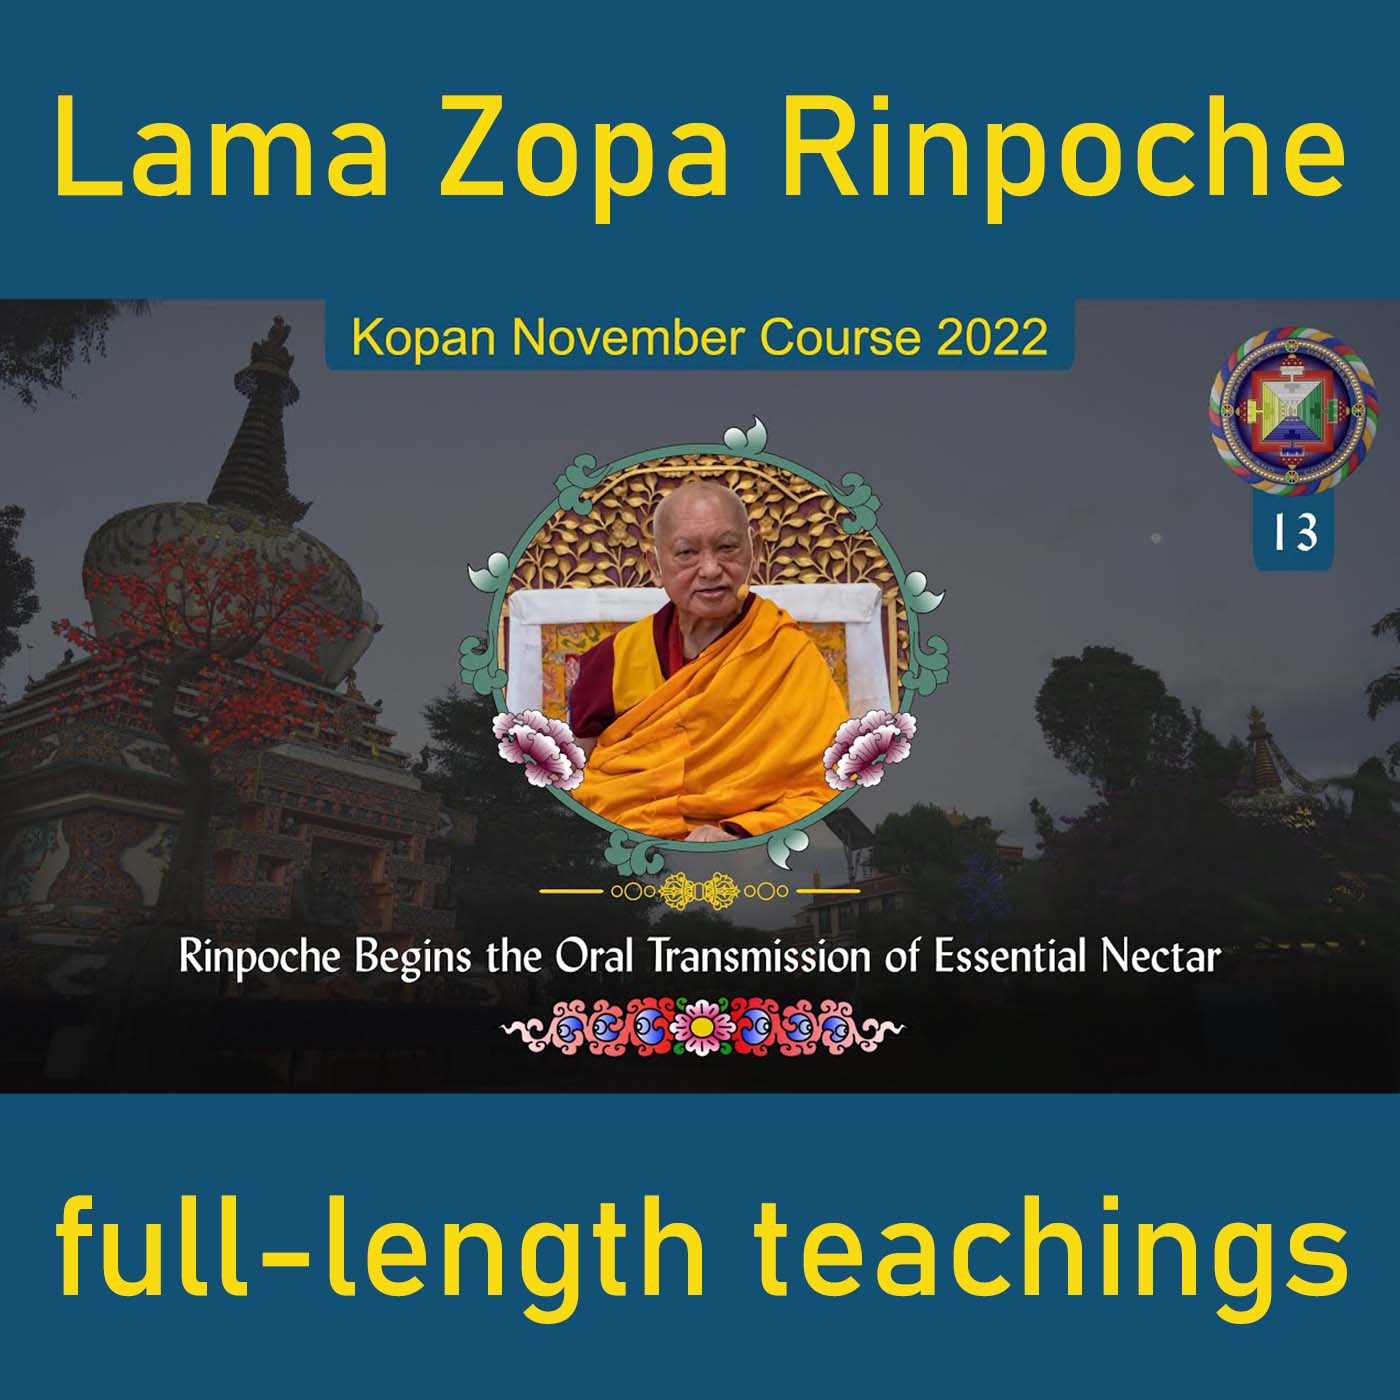 Rinpoche Begins the Oral Transmission of Essential Nectar